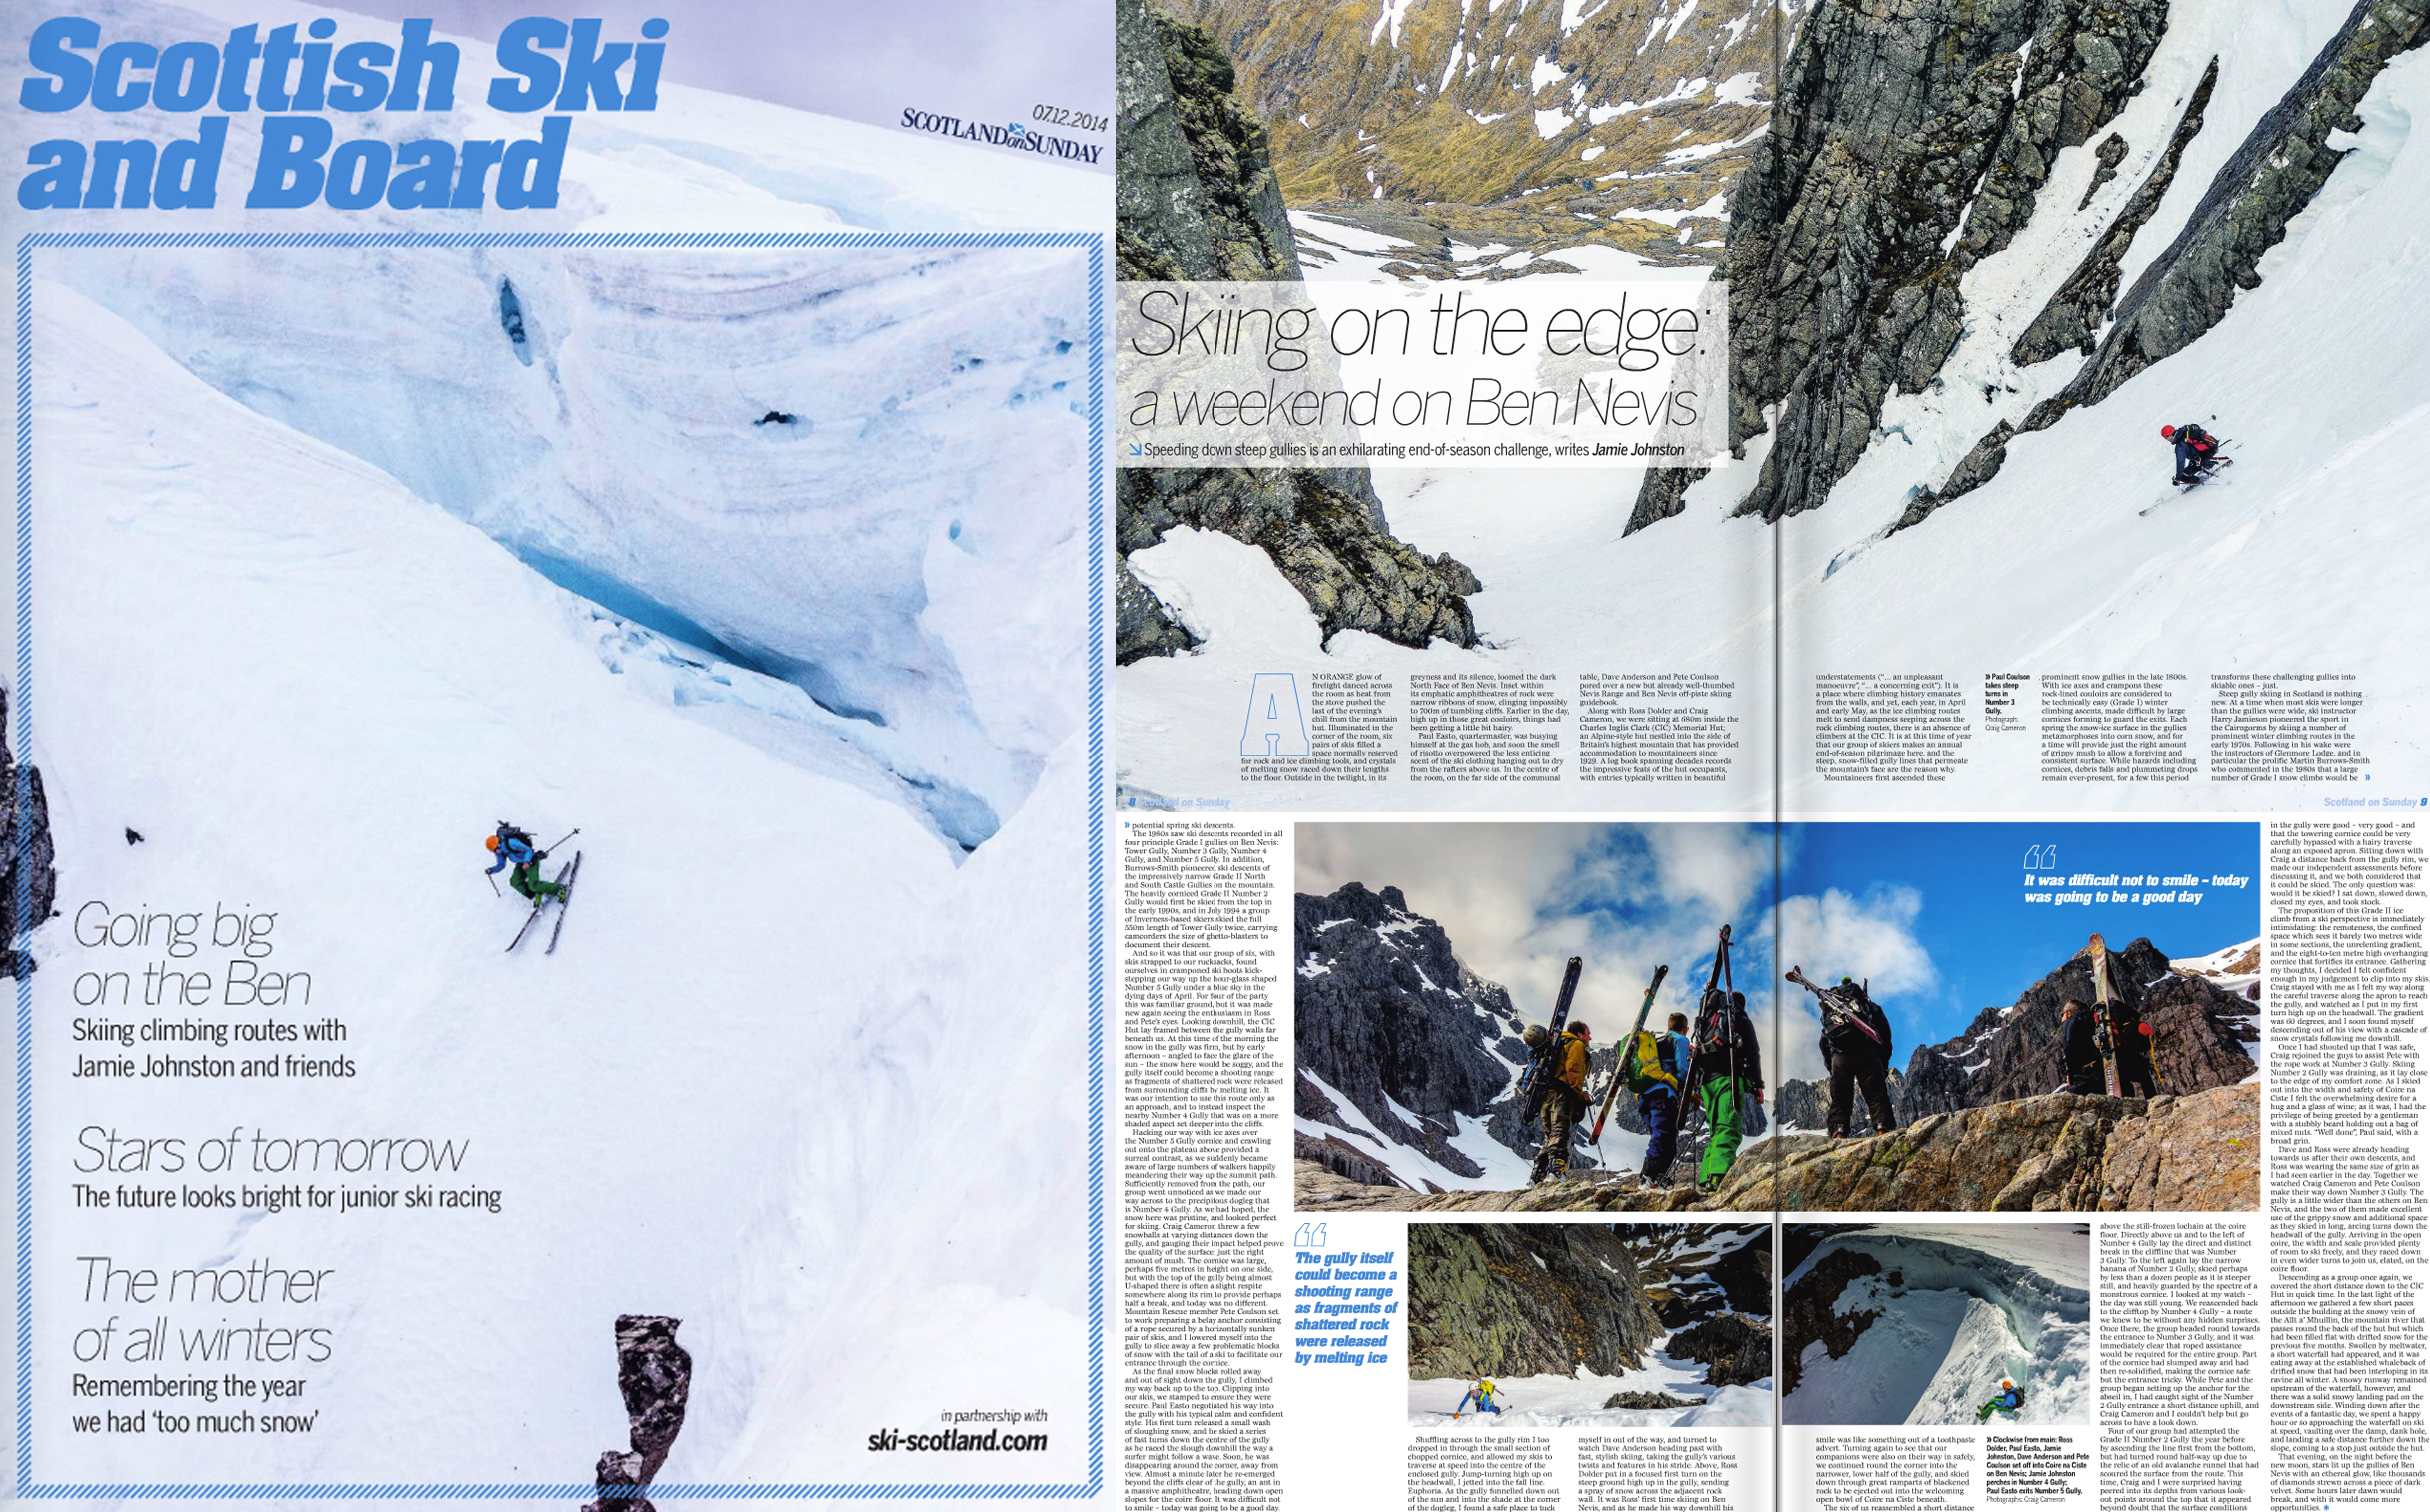 Skiing On The Edge - A Weekend On Ben Nevis [Cover photograph of, and 4 page article by, Highland Instinct's Jamie Johnston, appearing in Scotland on Sunday's annual 'Scottish Ski and Board' supplement, 07 Dec 2014]